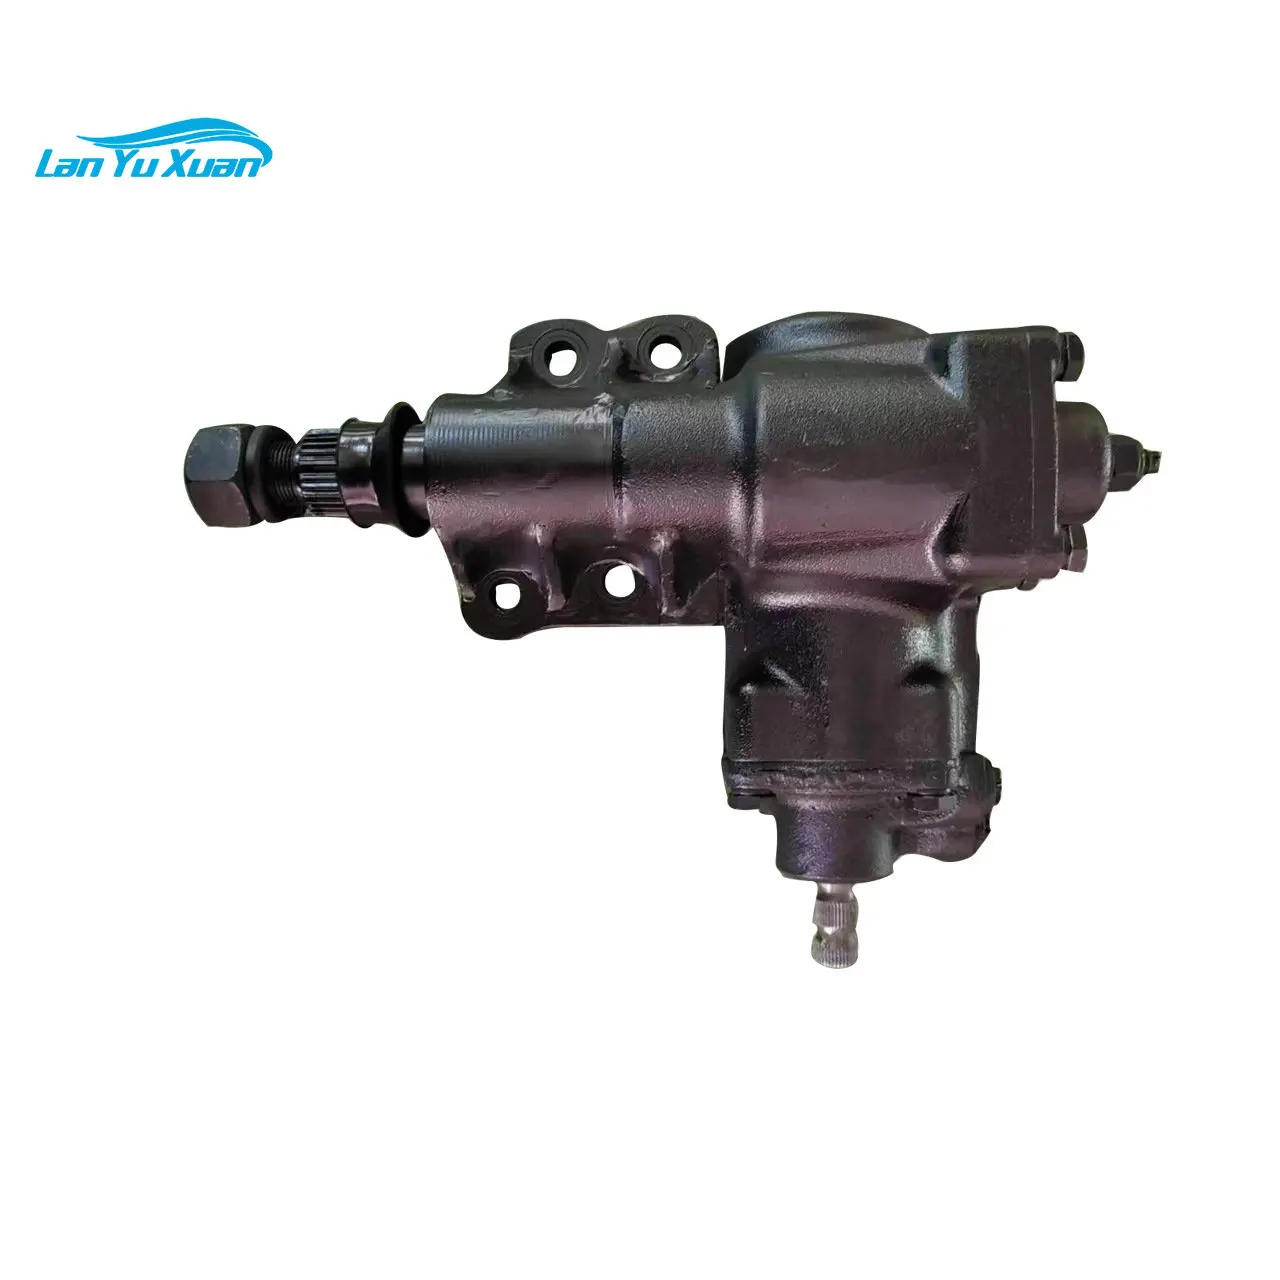 

Hot sell Cars Auto Parts steering gear box/rack for Mazda BT50 left hand driver OE UA3N32110